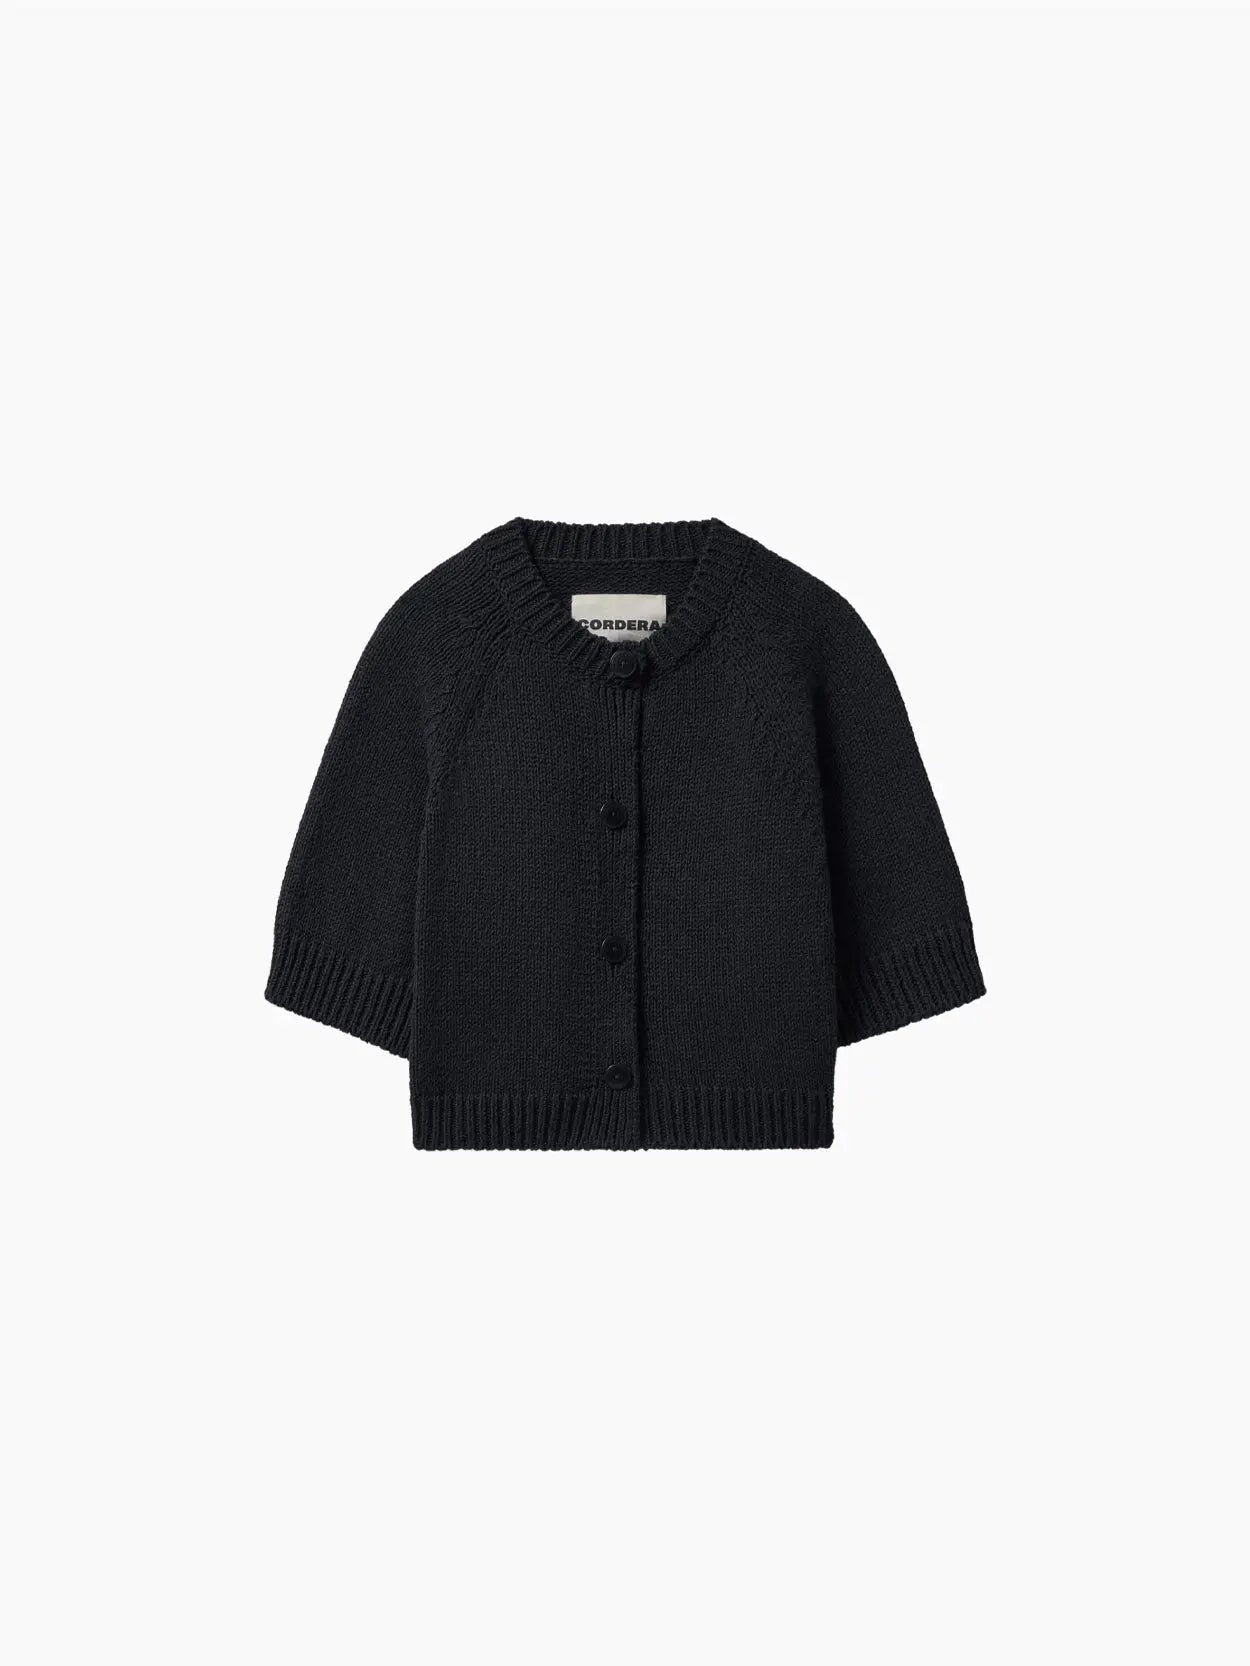 A black, long-sleeved baby cardigan with a crew neck and button-up front. The Cotton Buttoned Top Black, made of knitted fabric, is displayed on a plain white background. The label inside reads "Cordera." Available exclusively at bassalstore in Barcelona.